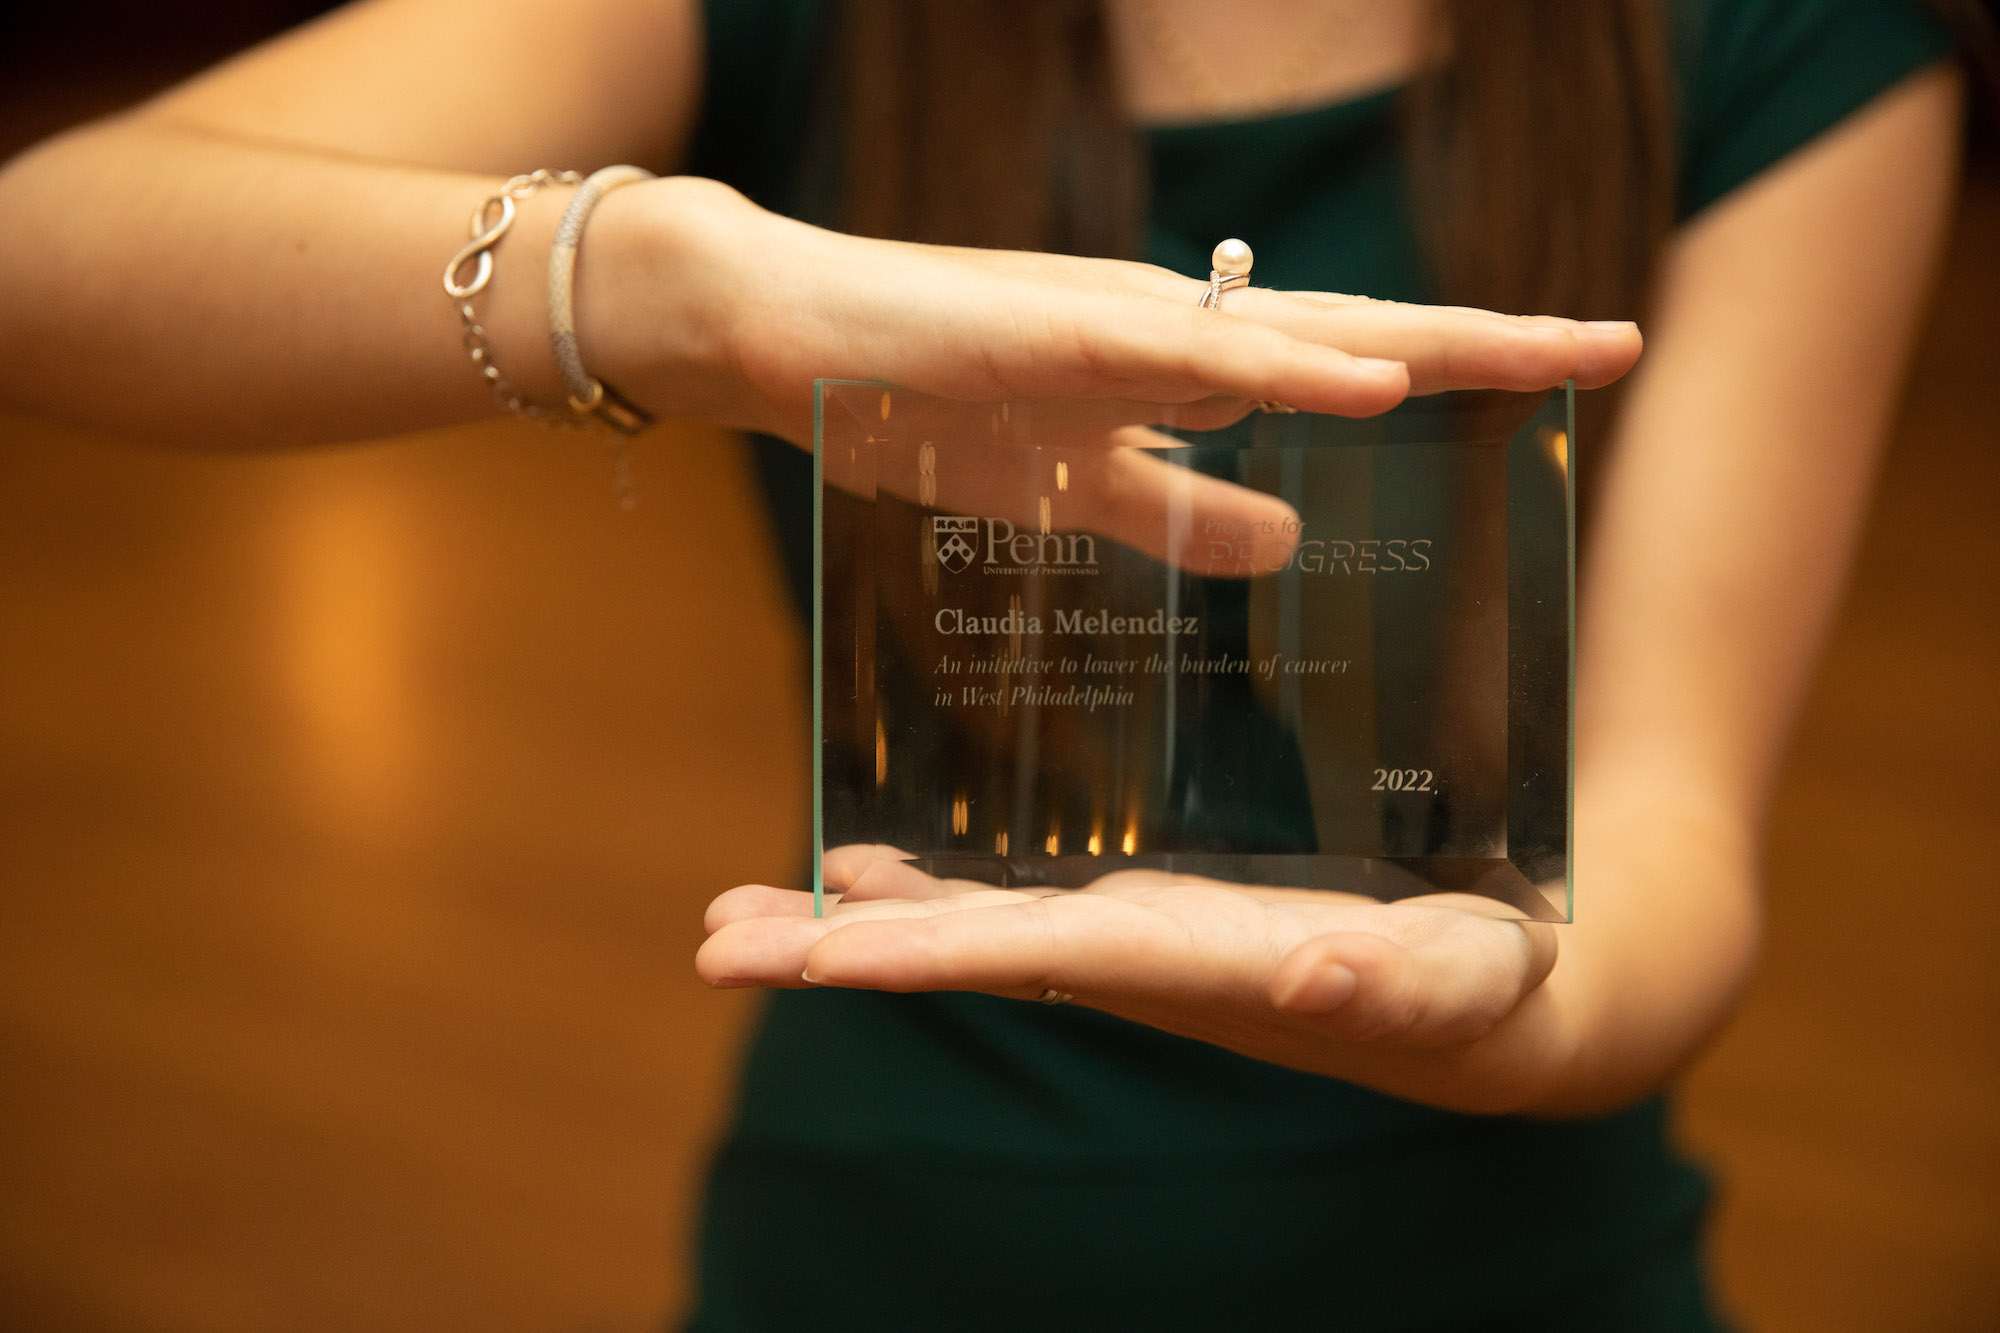 A woman holds up a glass award